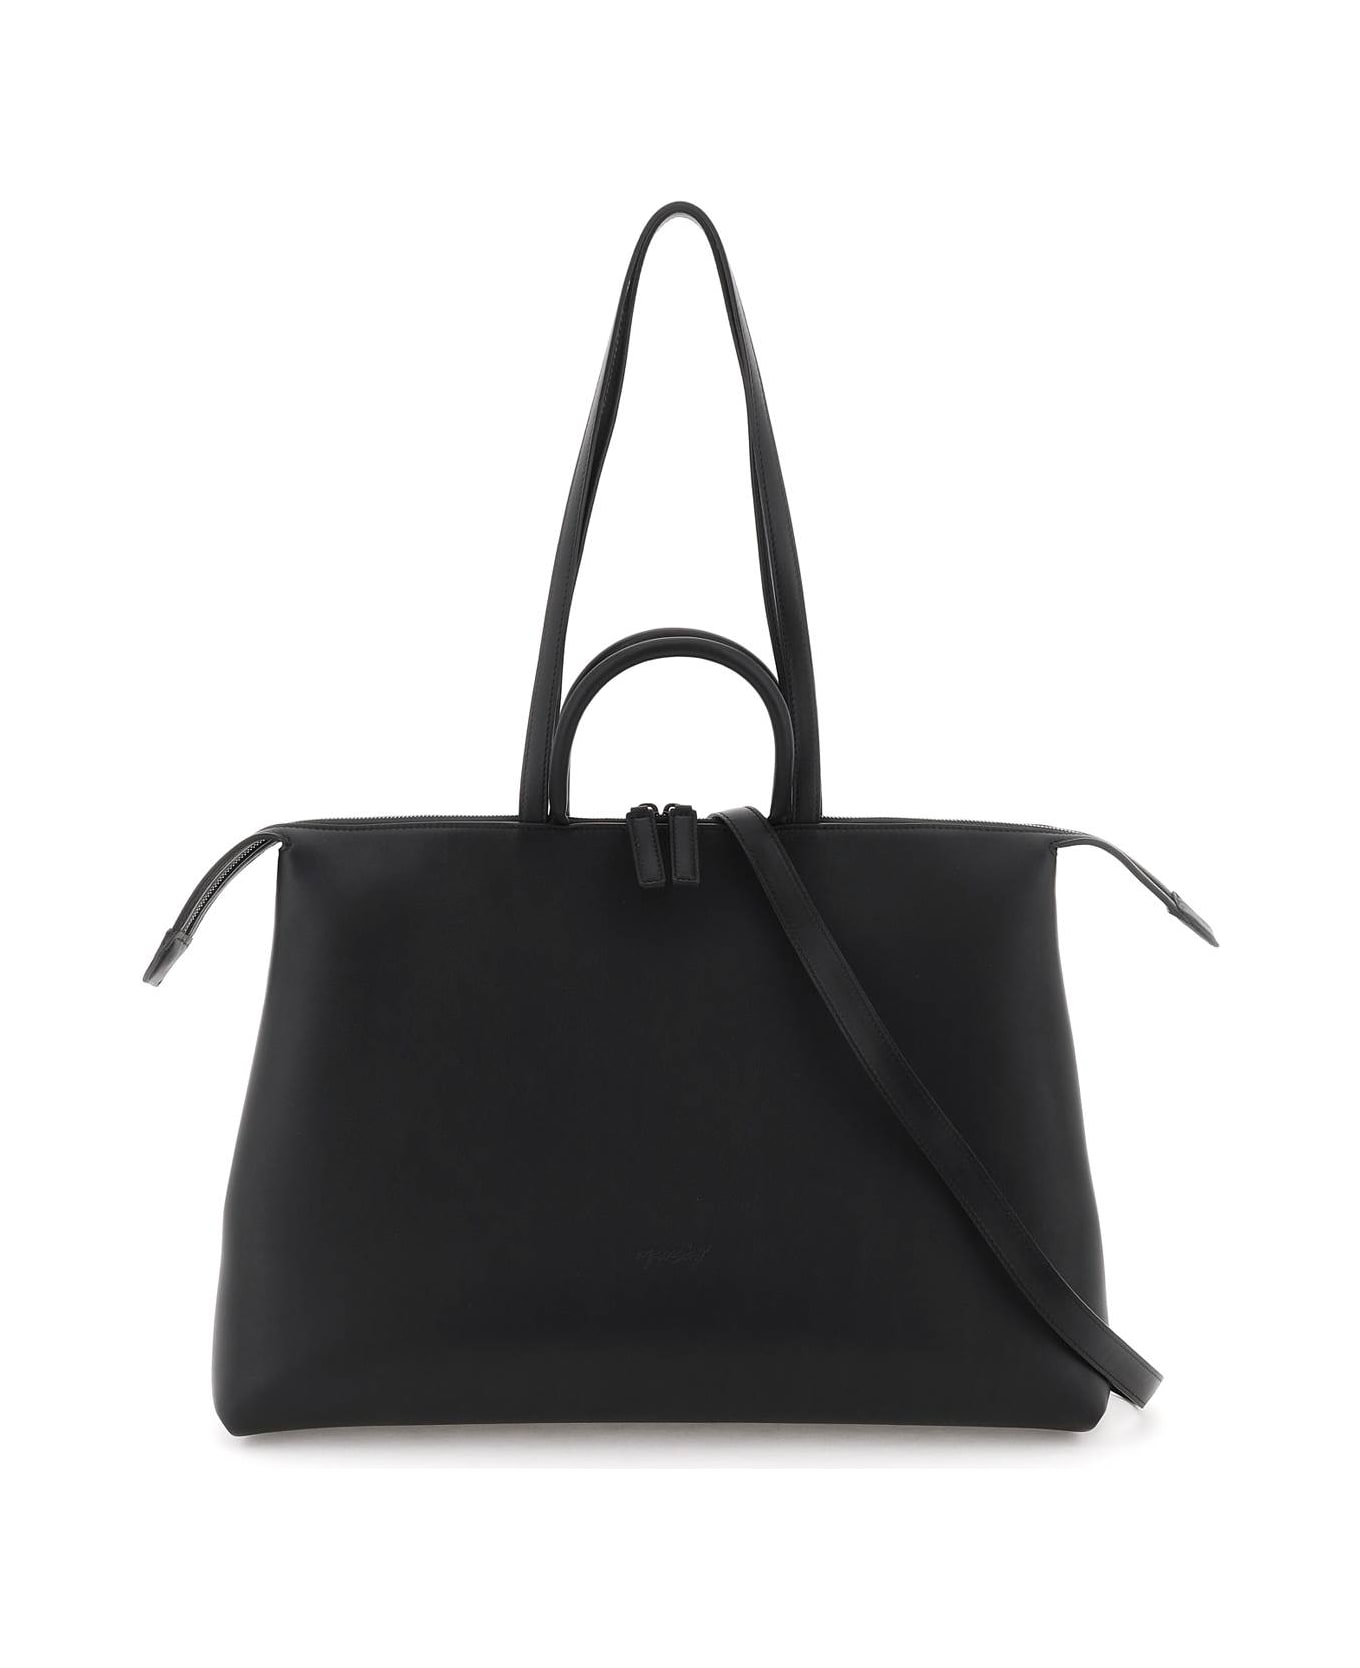 Marsell '4 In Orizzontale' Shoulder Bag - NERO (Black)